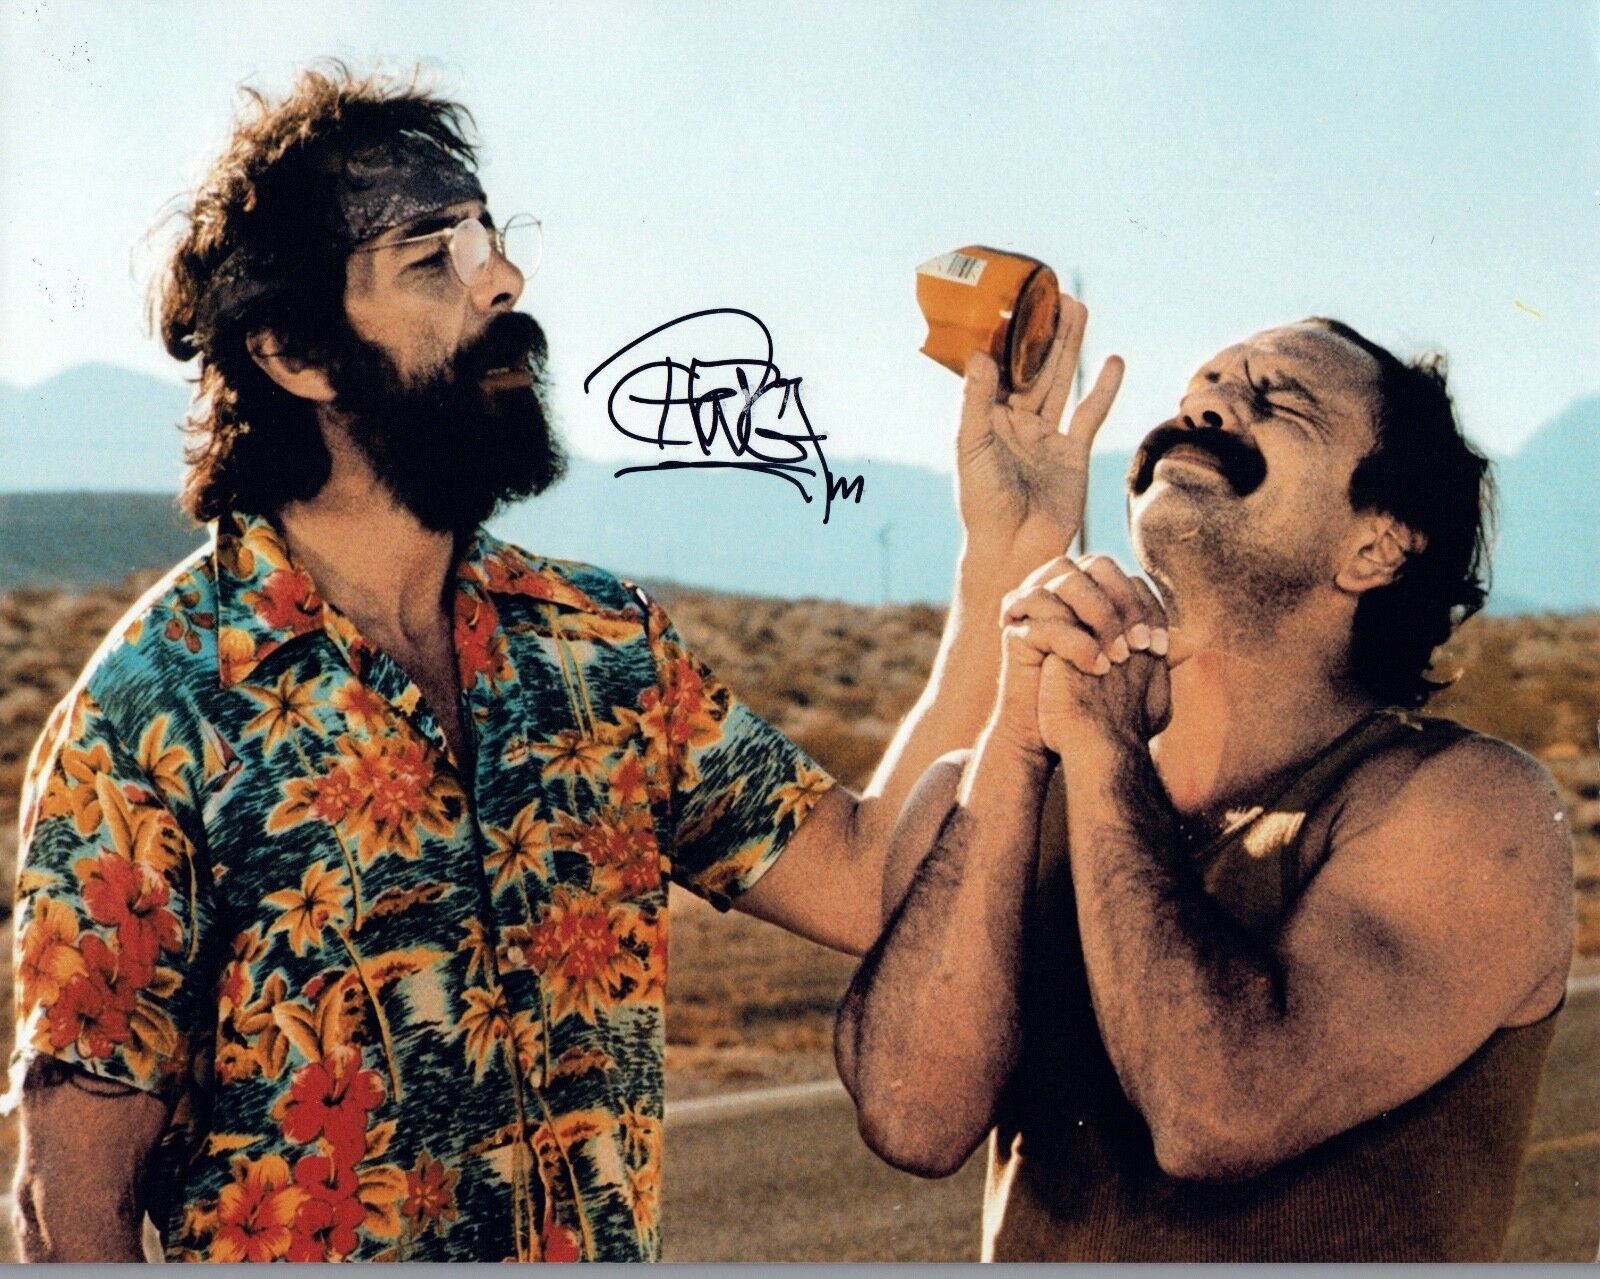 Tommy Chong Signed Autographed 8x10 Photo Poster painting Cheech and Chong COA VD